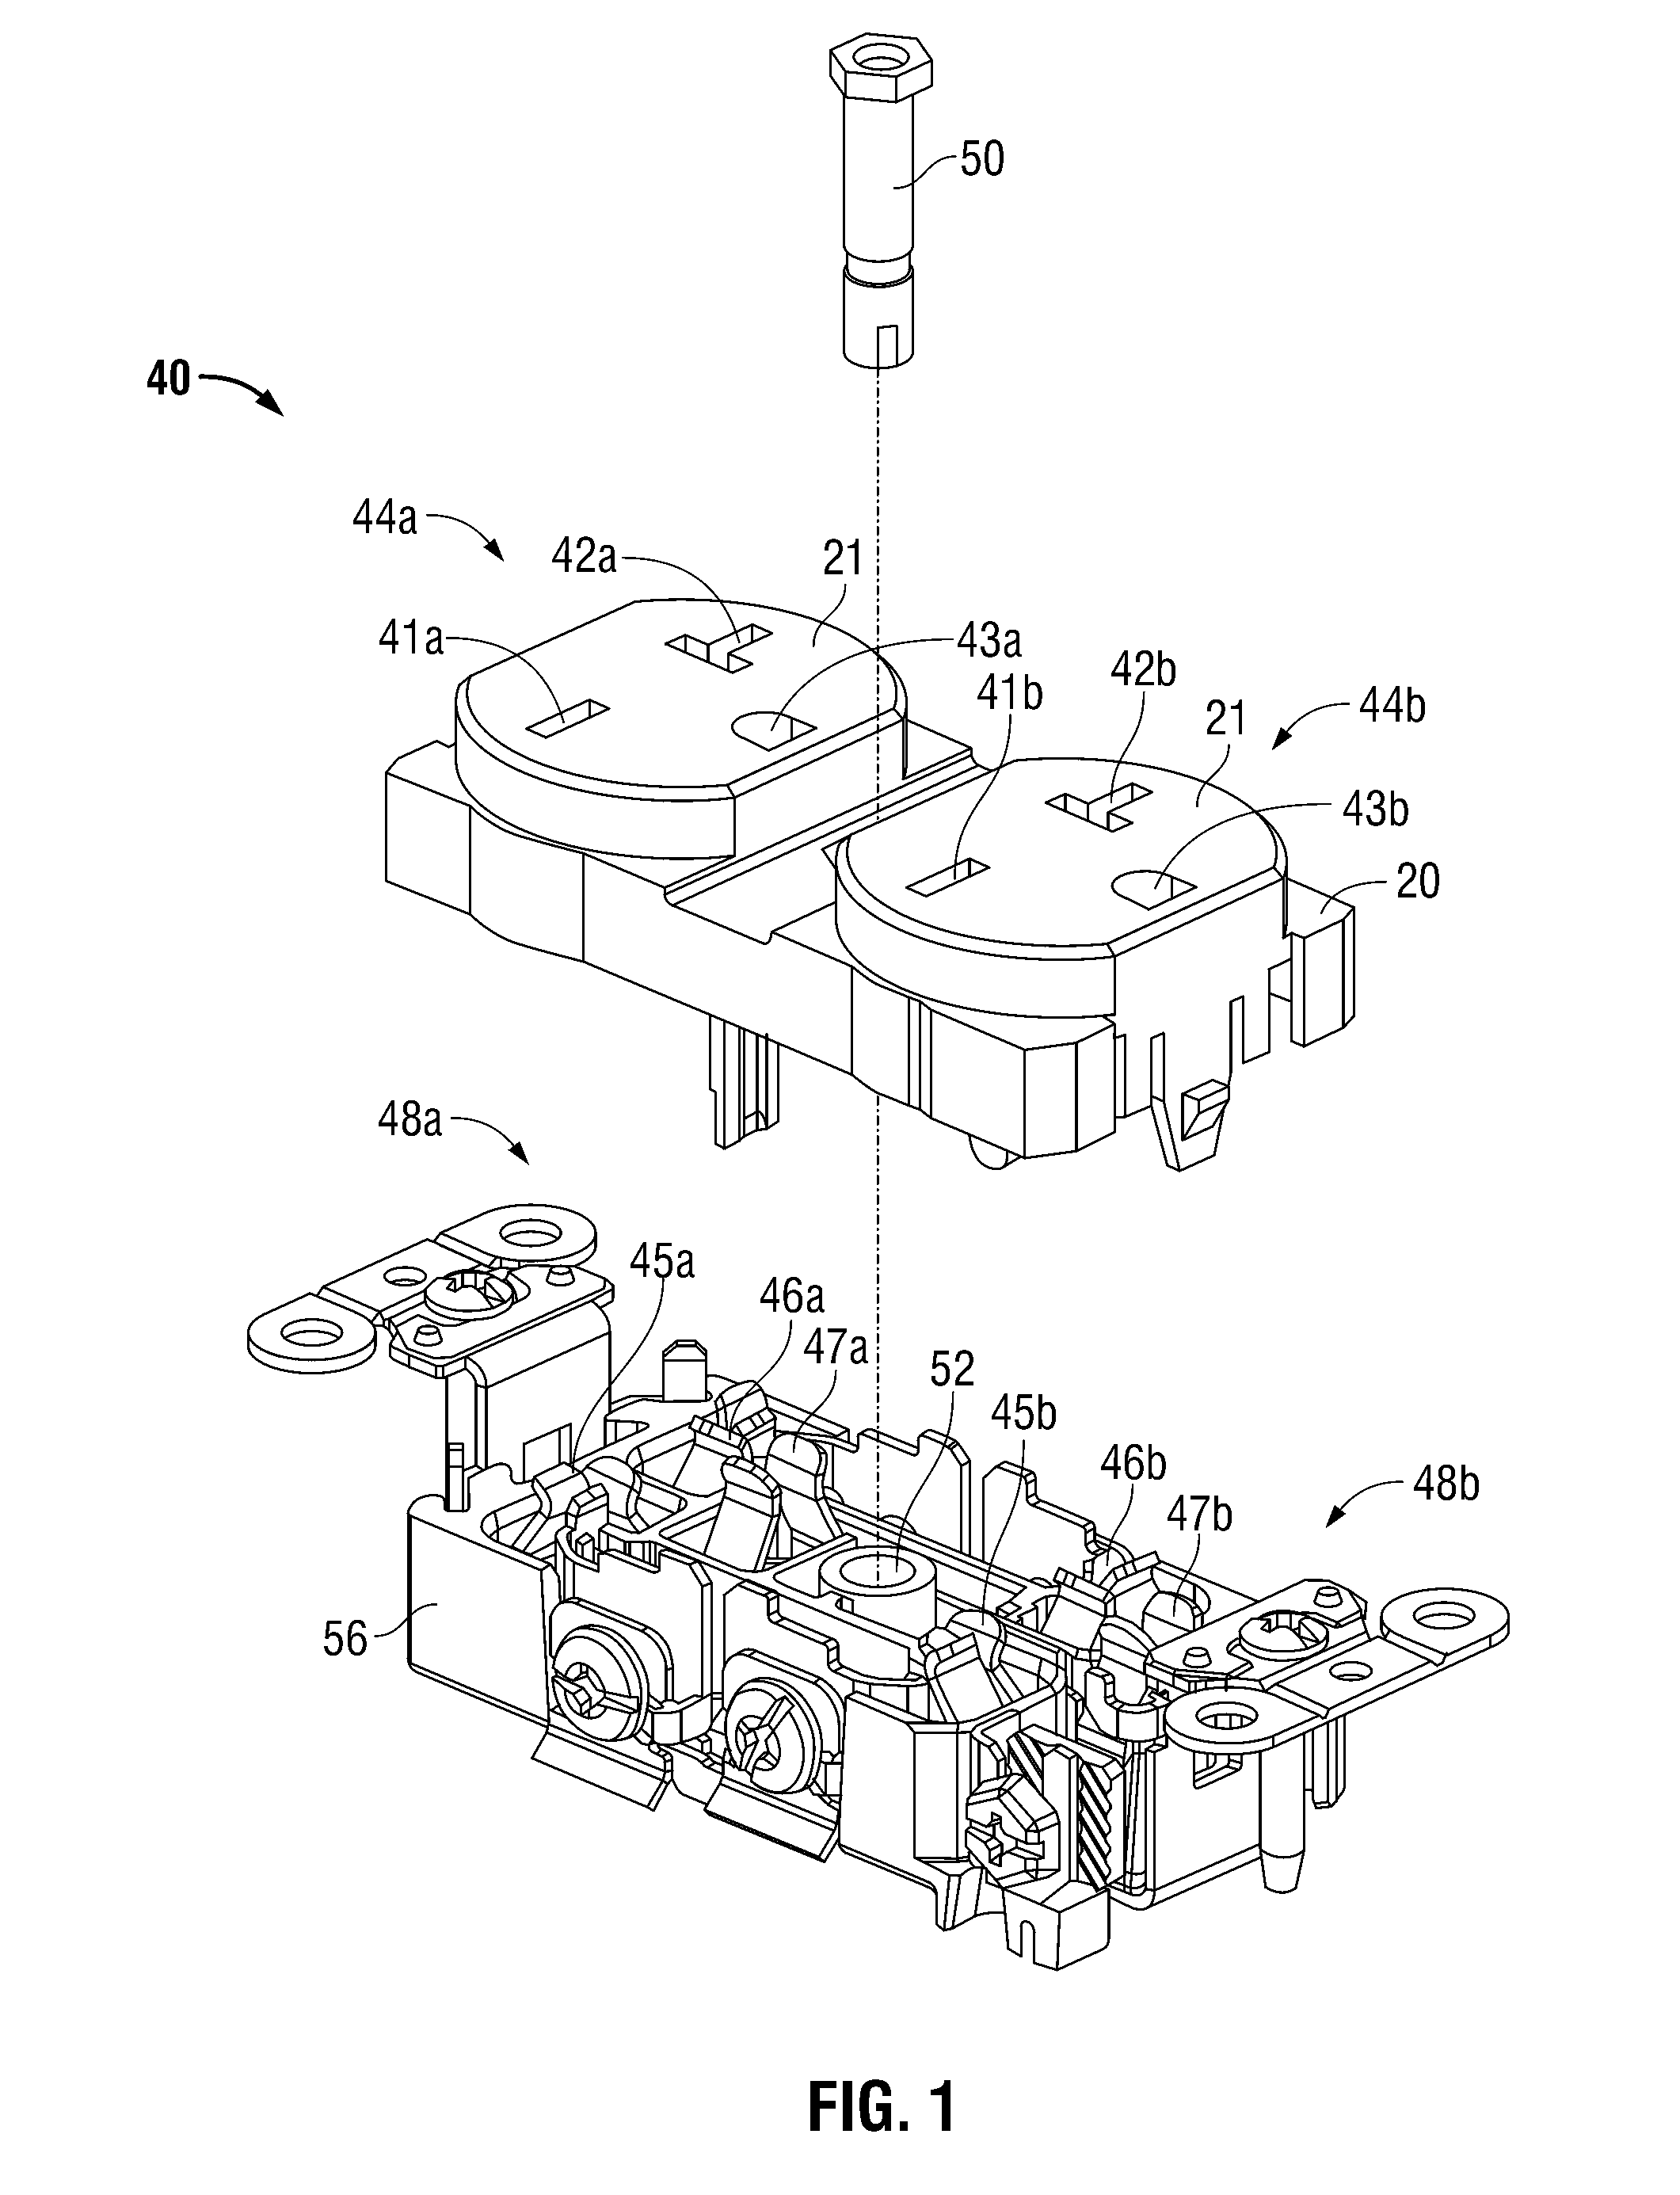 Tamper resistant electrical wiring device system